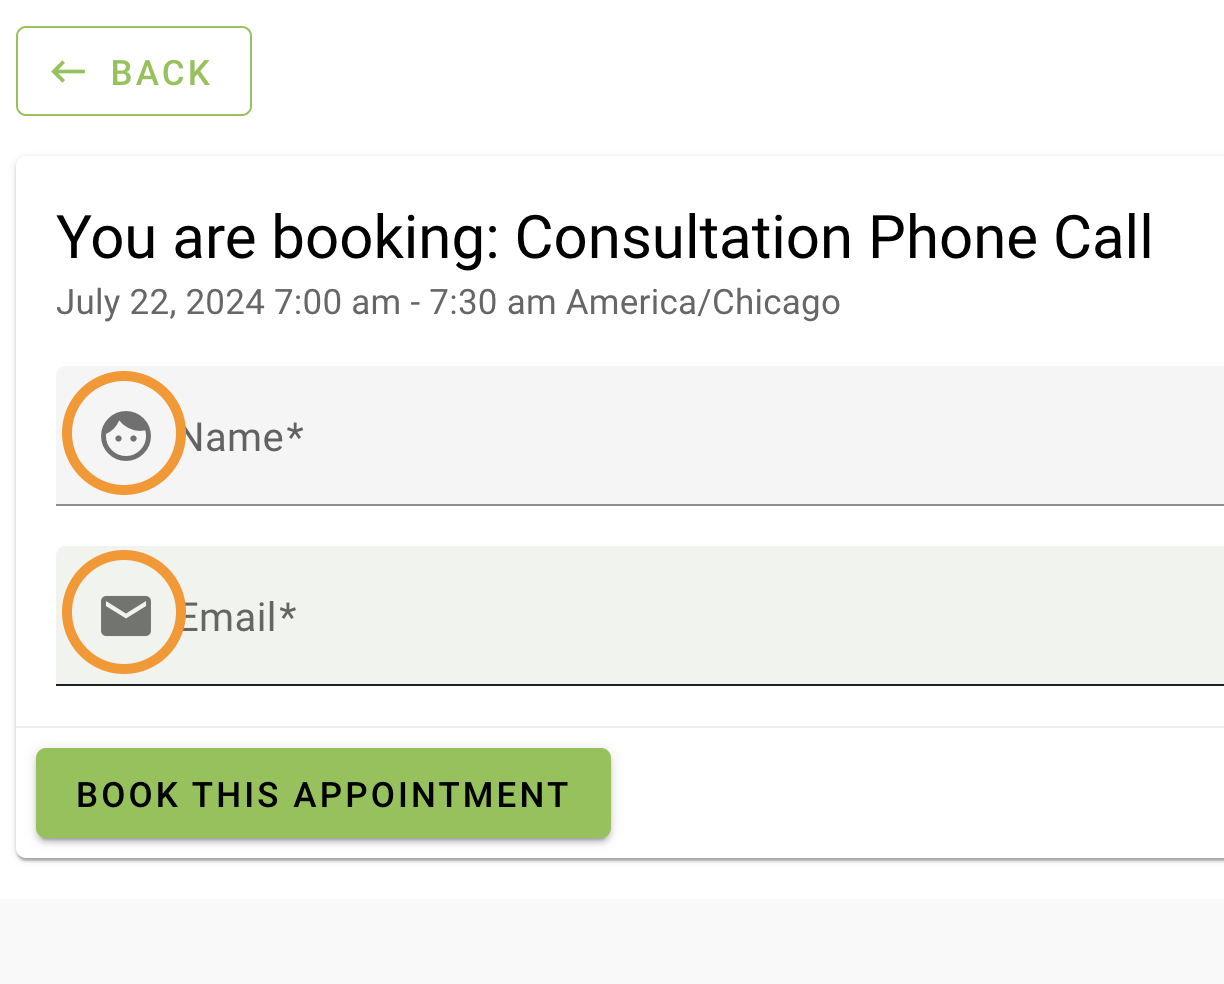 Field icons on booking form are highlighted